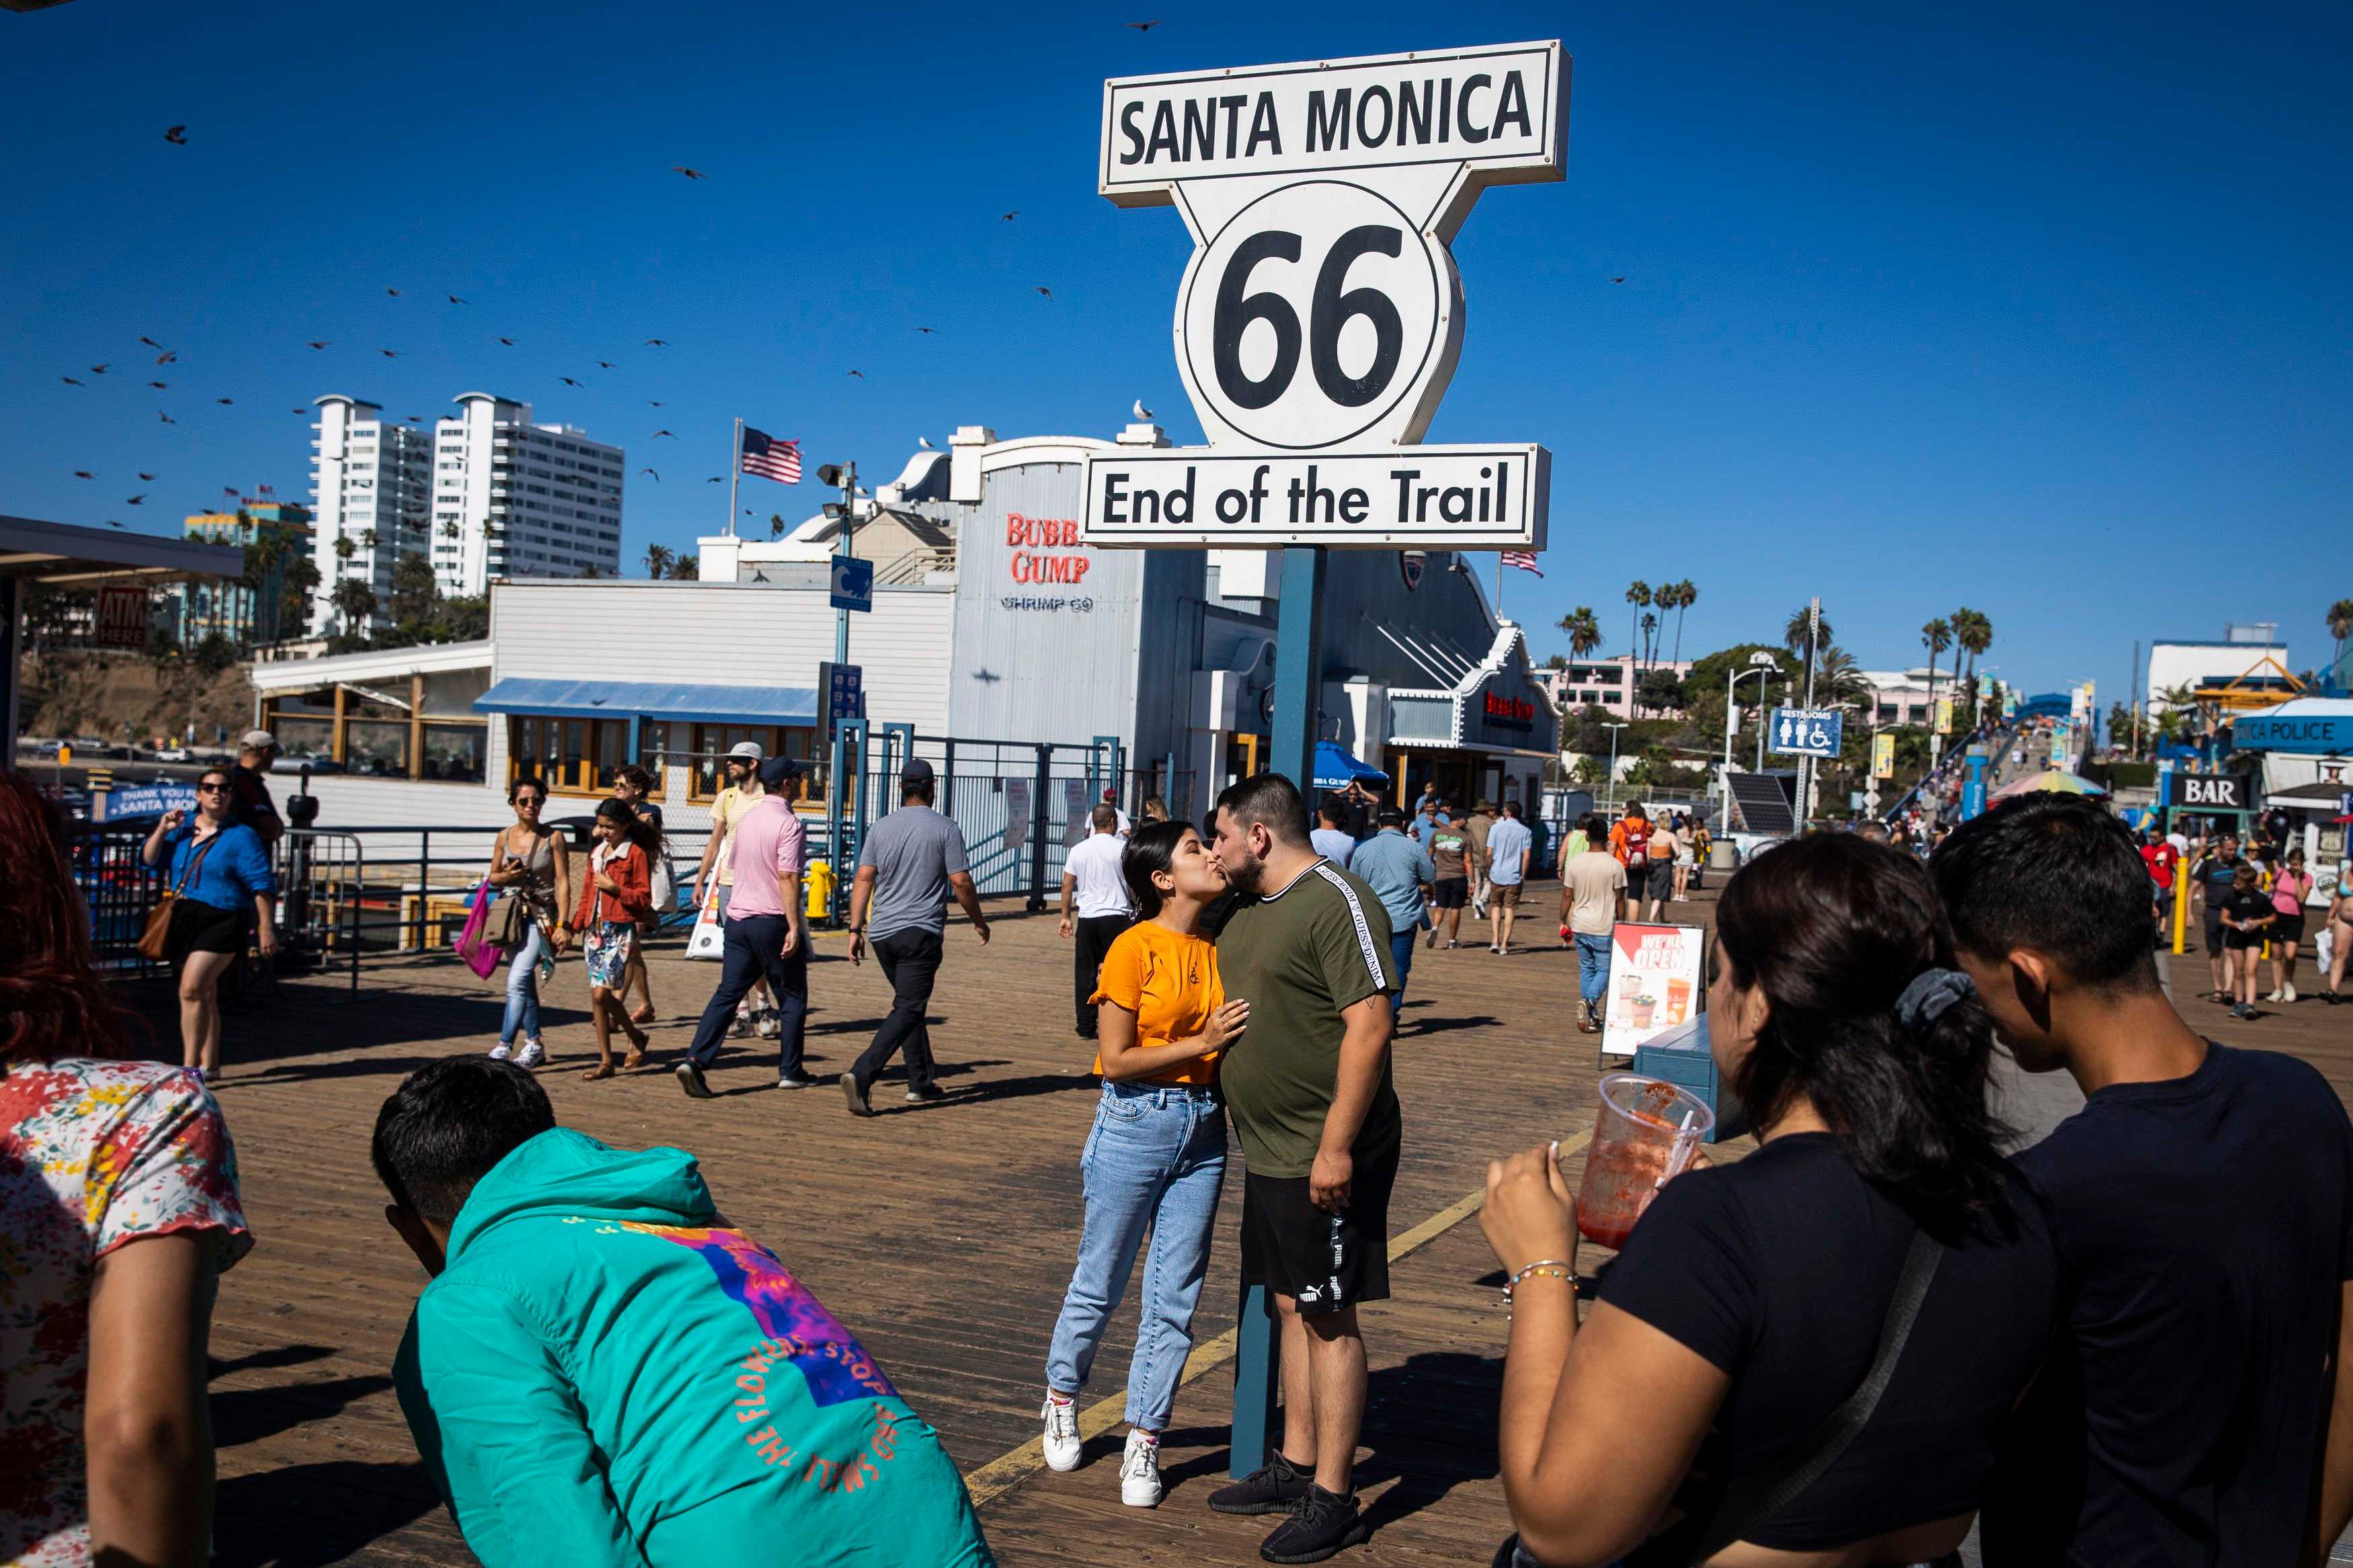 Tourists had their picture taken with the Route 66 sign, marking the end of the trail on the Santa Monica Pier in California.